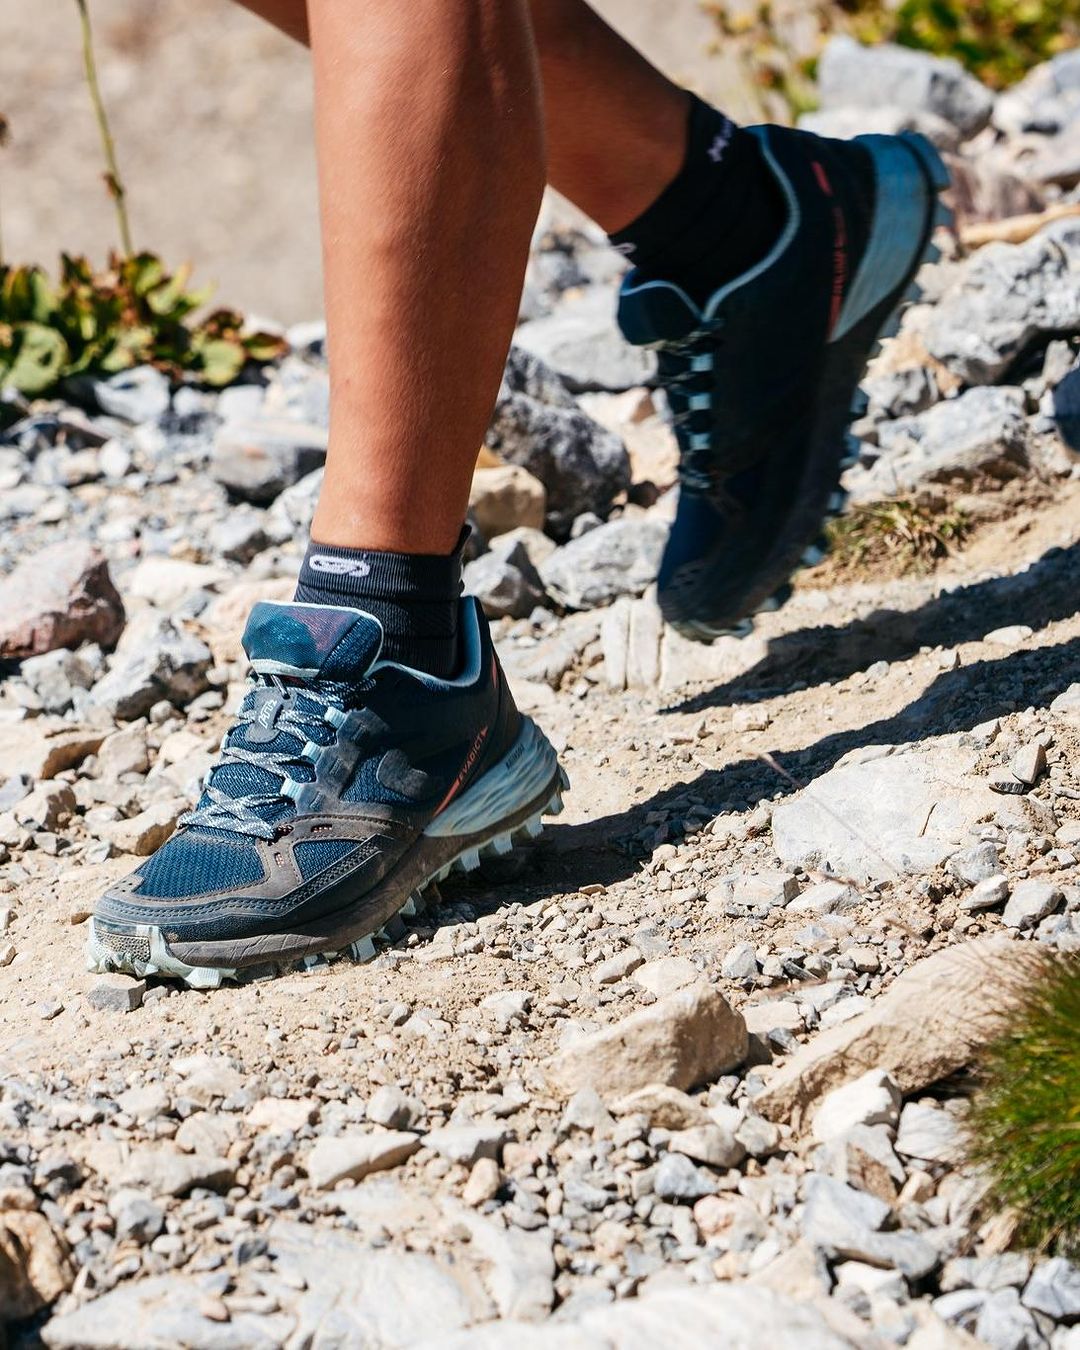 Close-up image of a person wearing hiking shoes on a trail